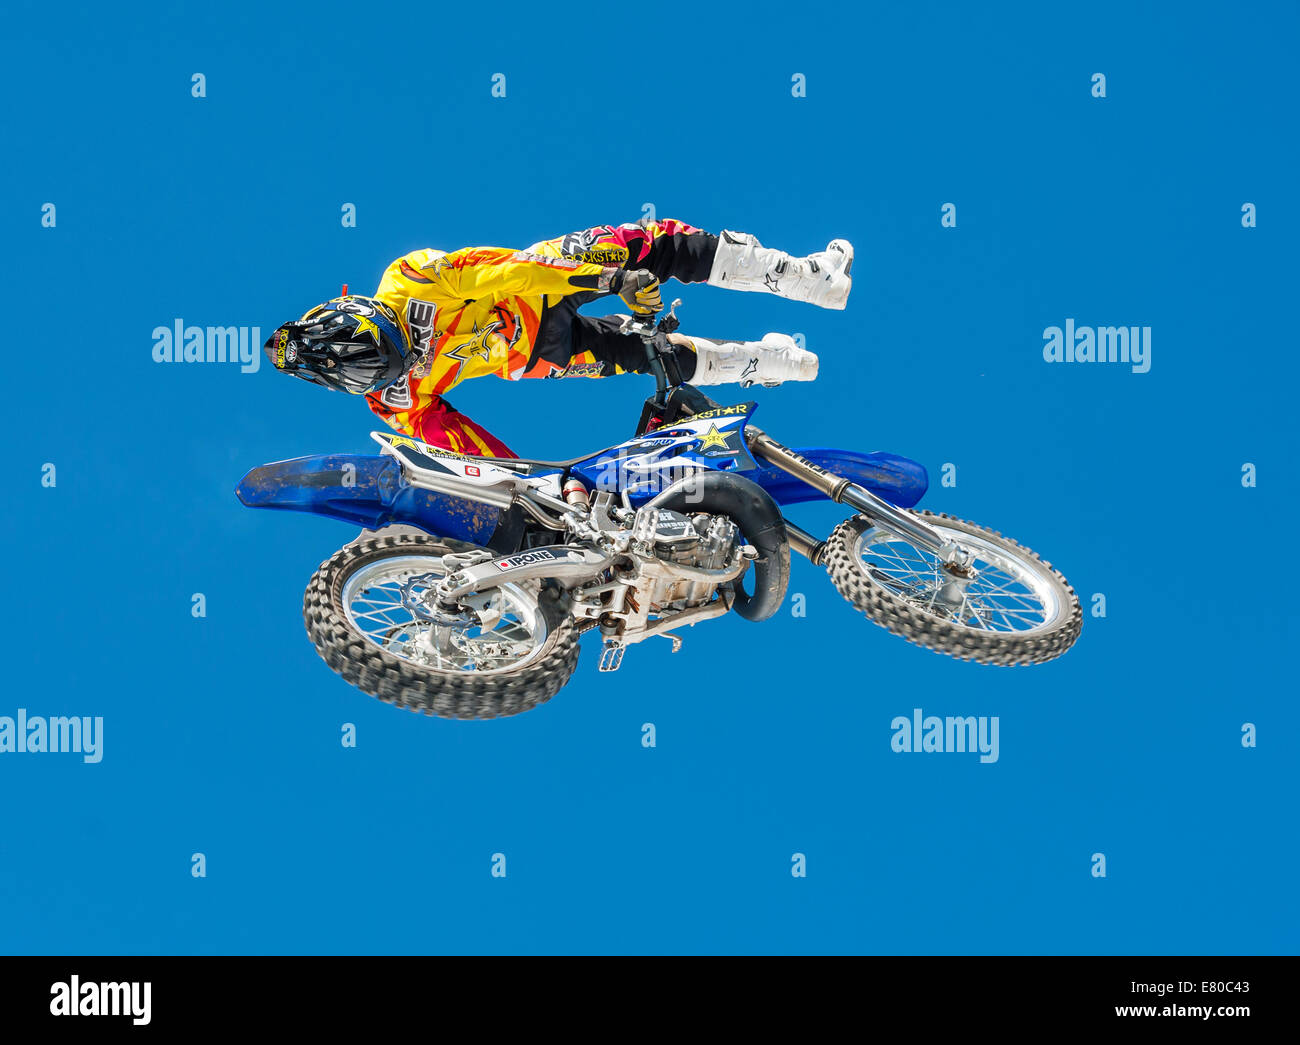 Zurich, Switzerland. 27th Sep, 2014. Don't try this at home! Clinton Moore (AUS), winner of the FMX style session is flying upside down at 'freestyle.ch', Europe's largest freestyle event at Zurich. Credit:  Erik Tham/Alamy Live News Stock Photo